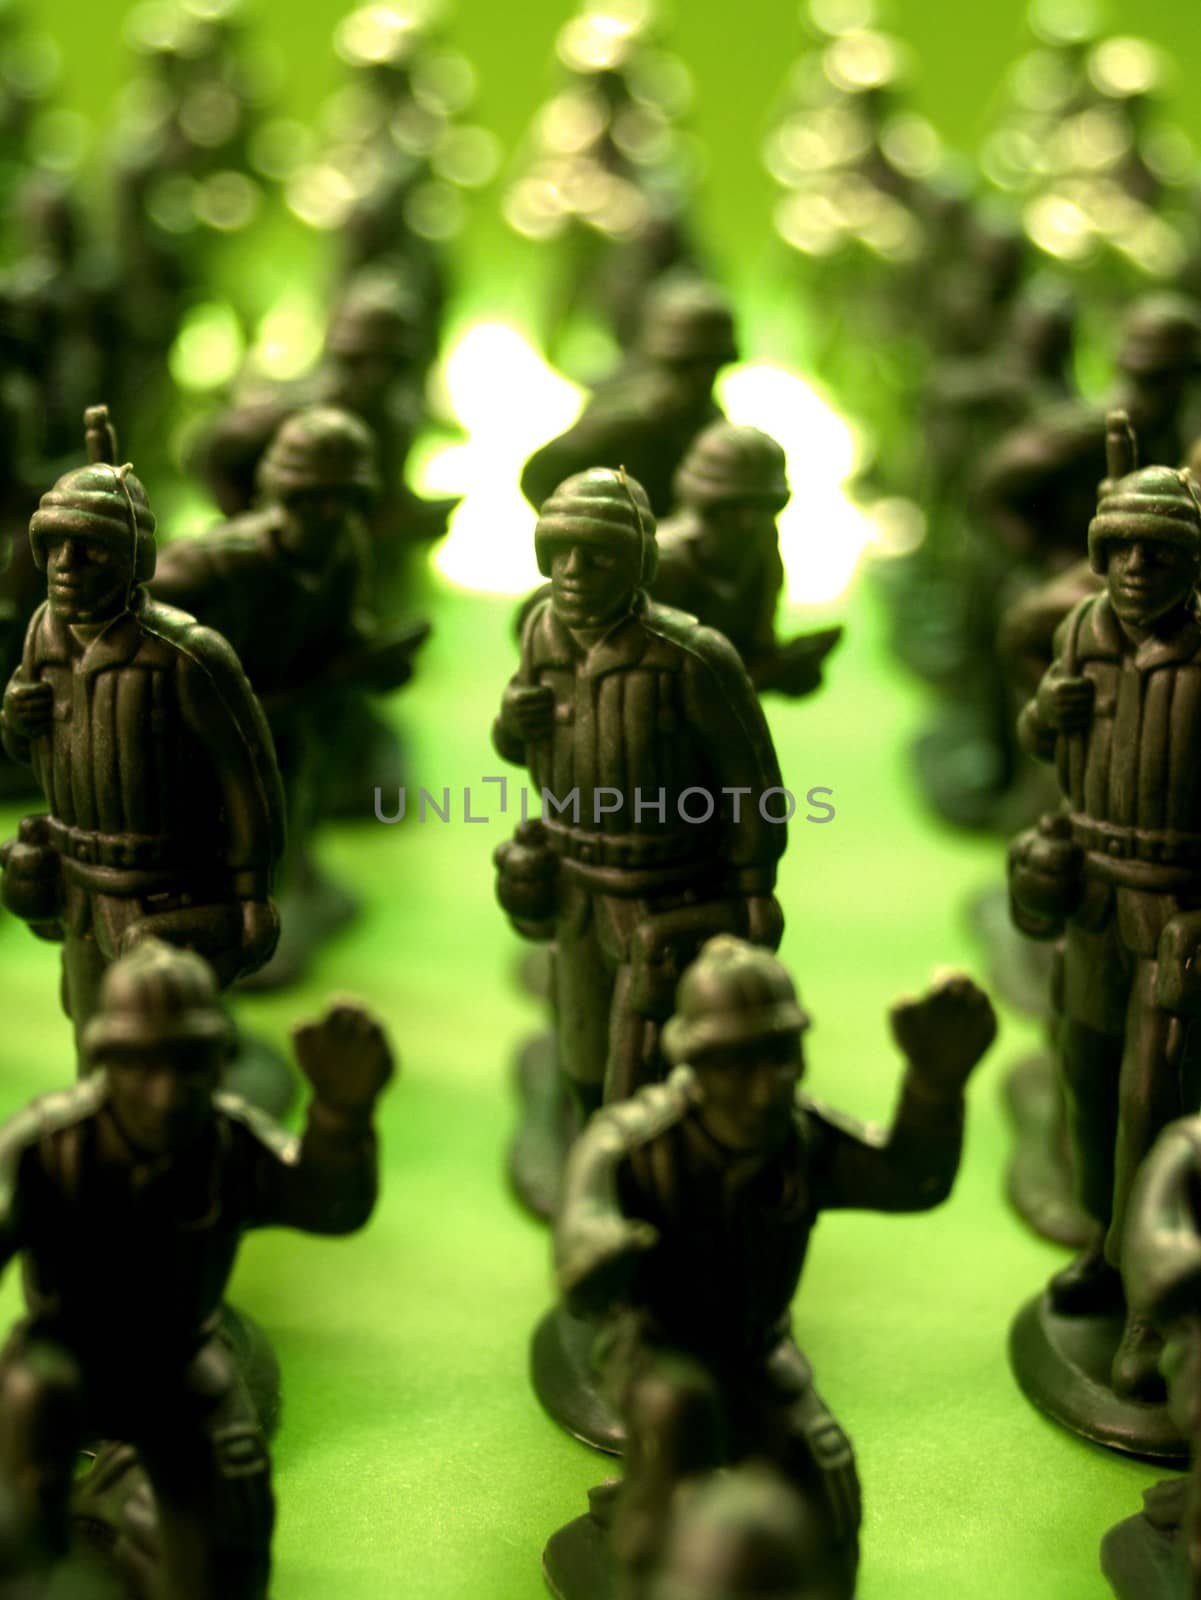 toy soldiers attack the enemy